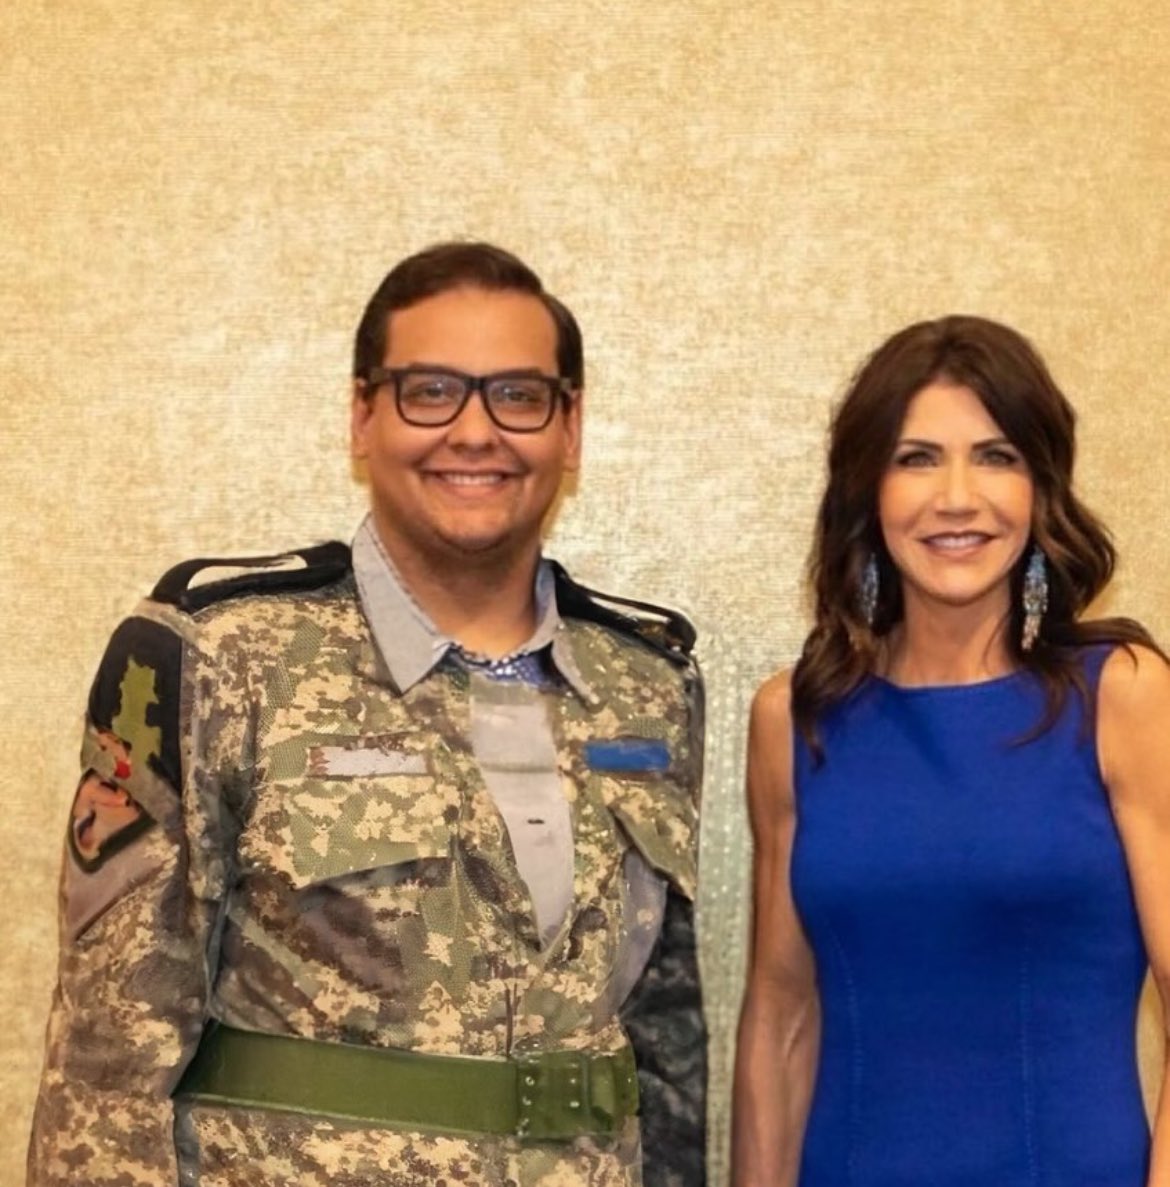 Kristi Noem releases her photo with Kim Jung Un.